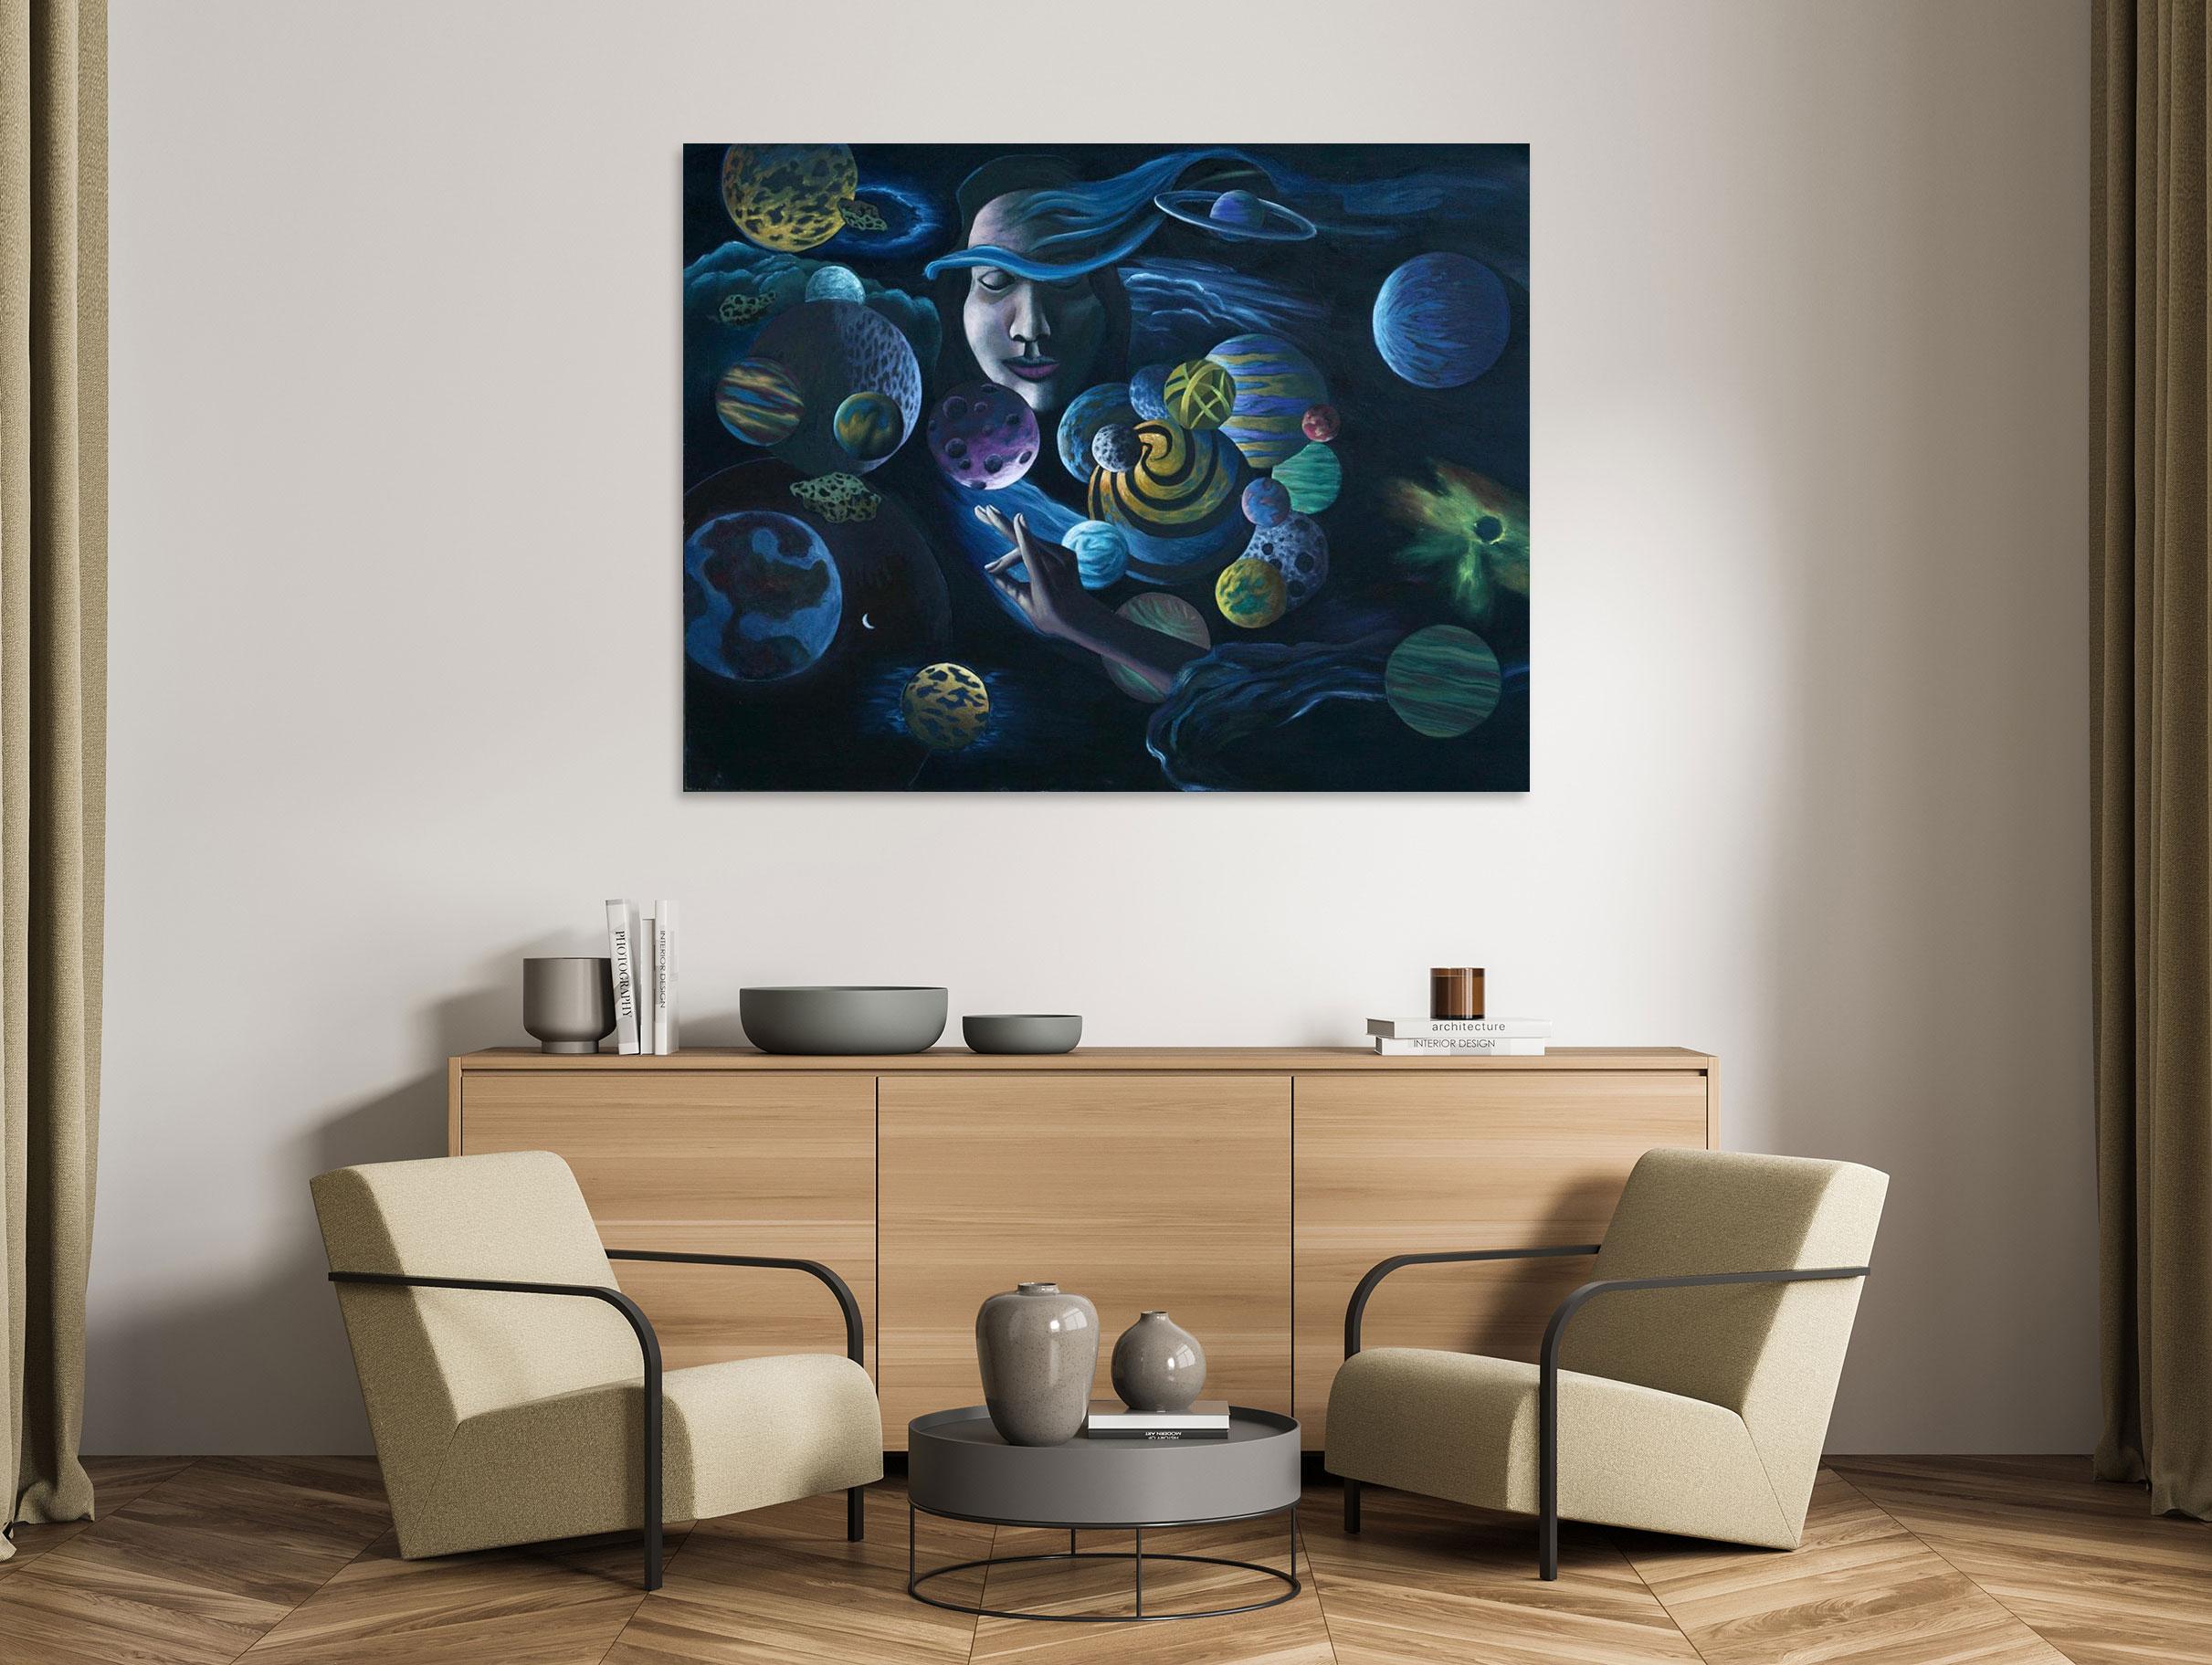 The Goddess creates from within her own creative imagination .Universes appear as her mudra engenders planets and stars.

Cosmic Gal -  Figurative Painting- Spacescape Art By Marc Zimmerman

This masterpiece is exhibited in the Zimmerman Gallery,